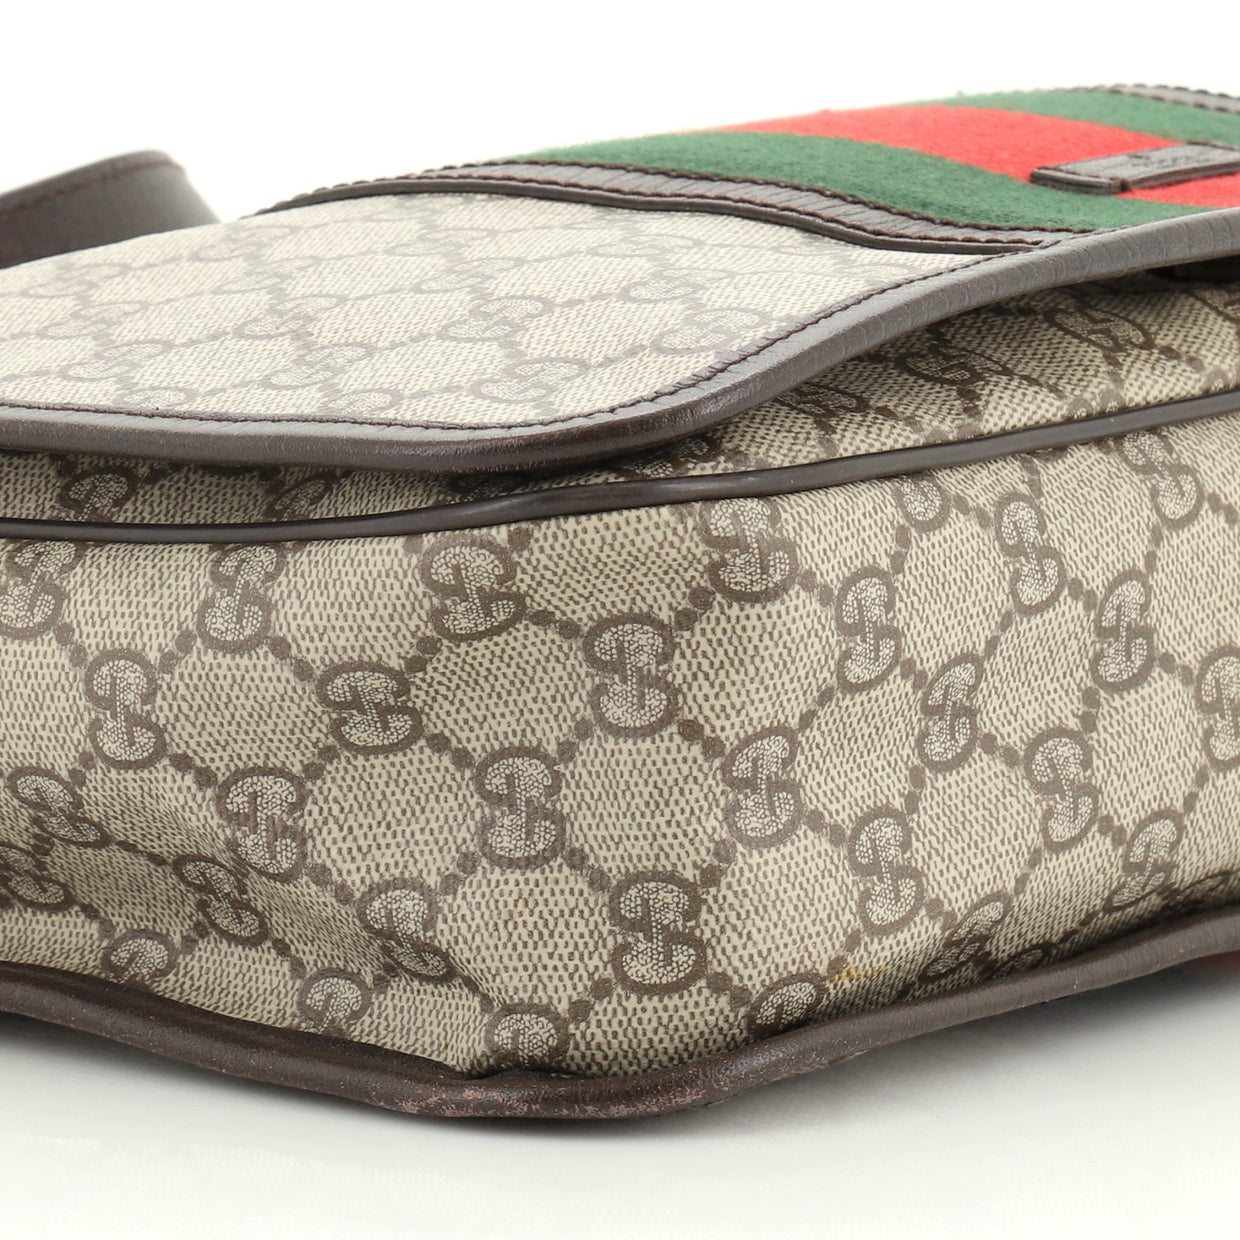 gucci messenger bag with flap